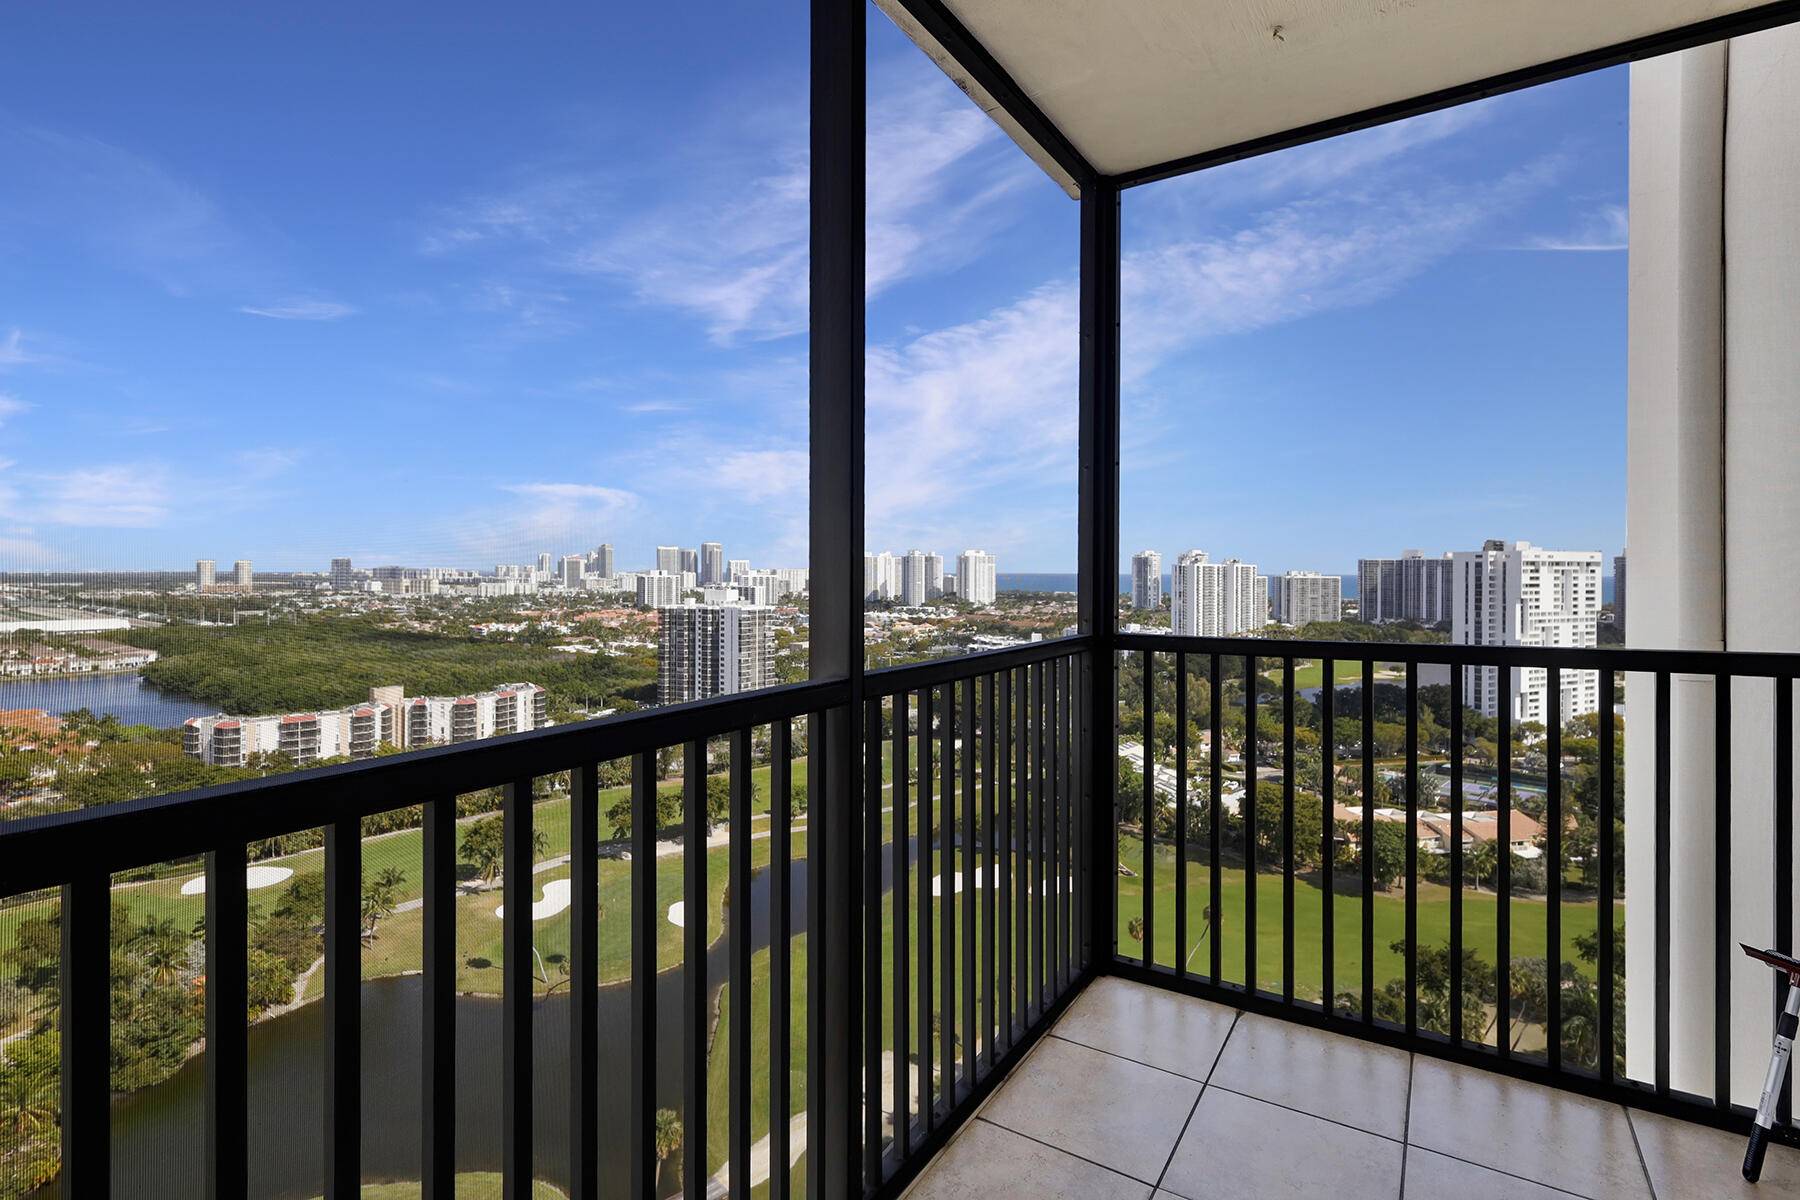 In the heart of Aventura, offering sweeping ocean views from the 26th floor sits this incredible condo, ready for you to make it your own.